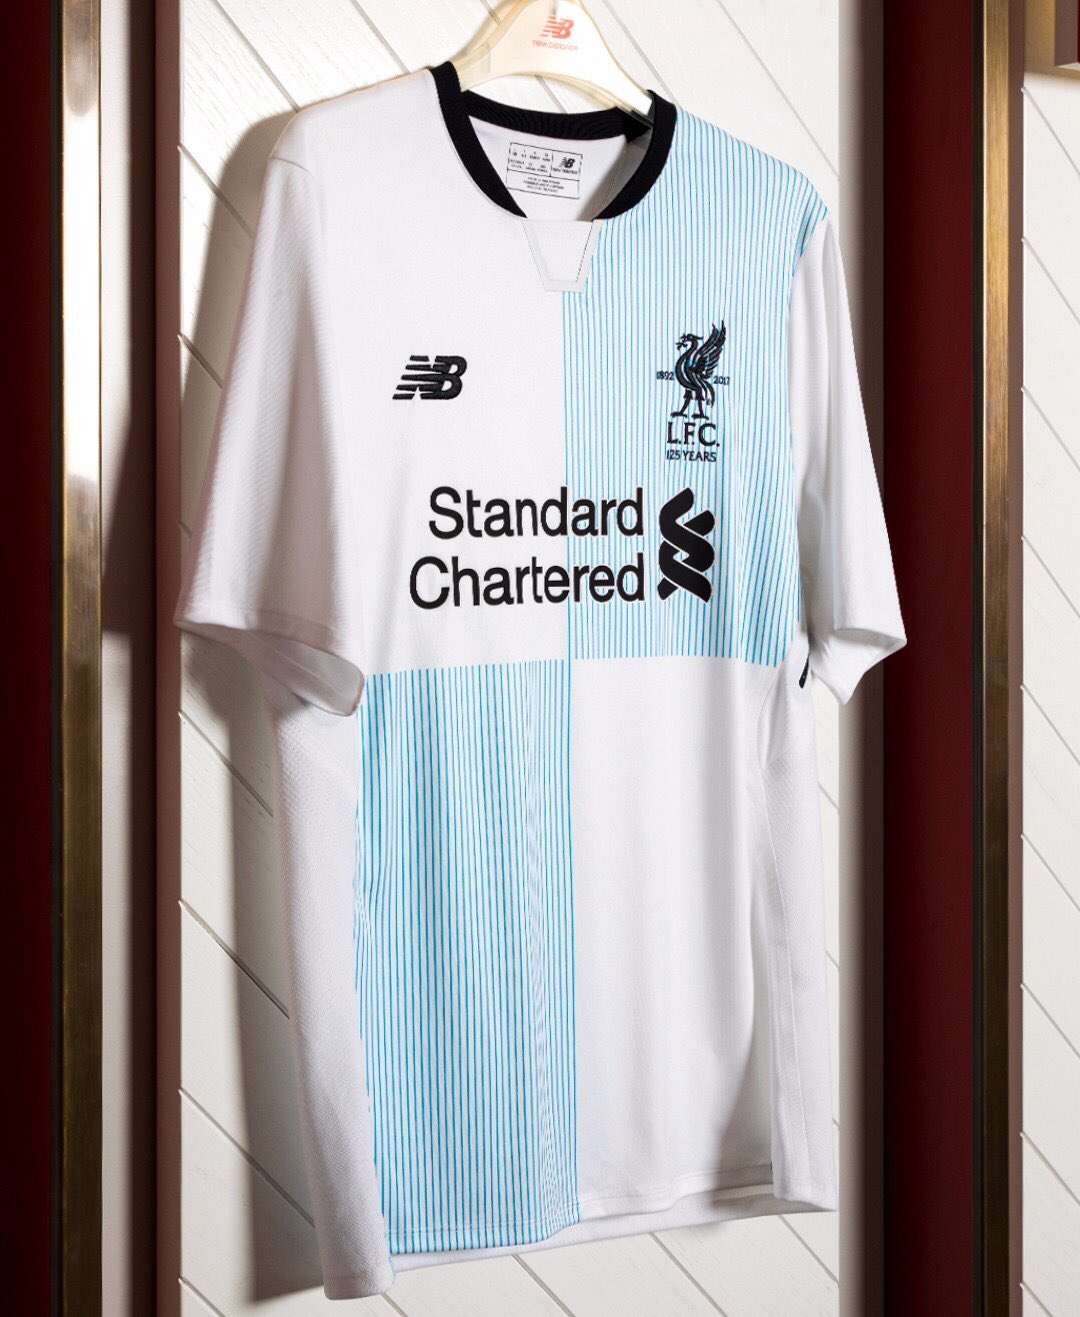 limited-edition-liverpool-17-18-away-jersey.jpg